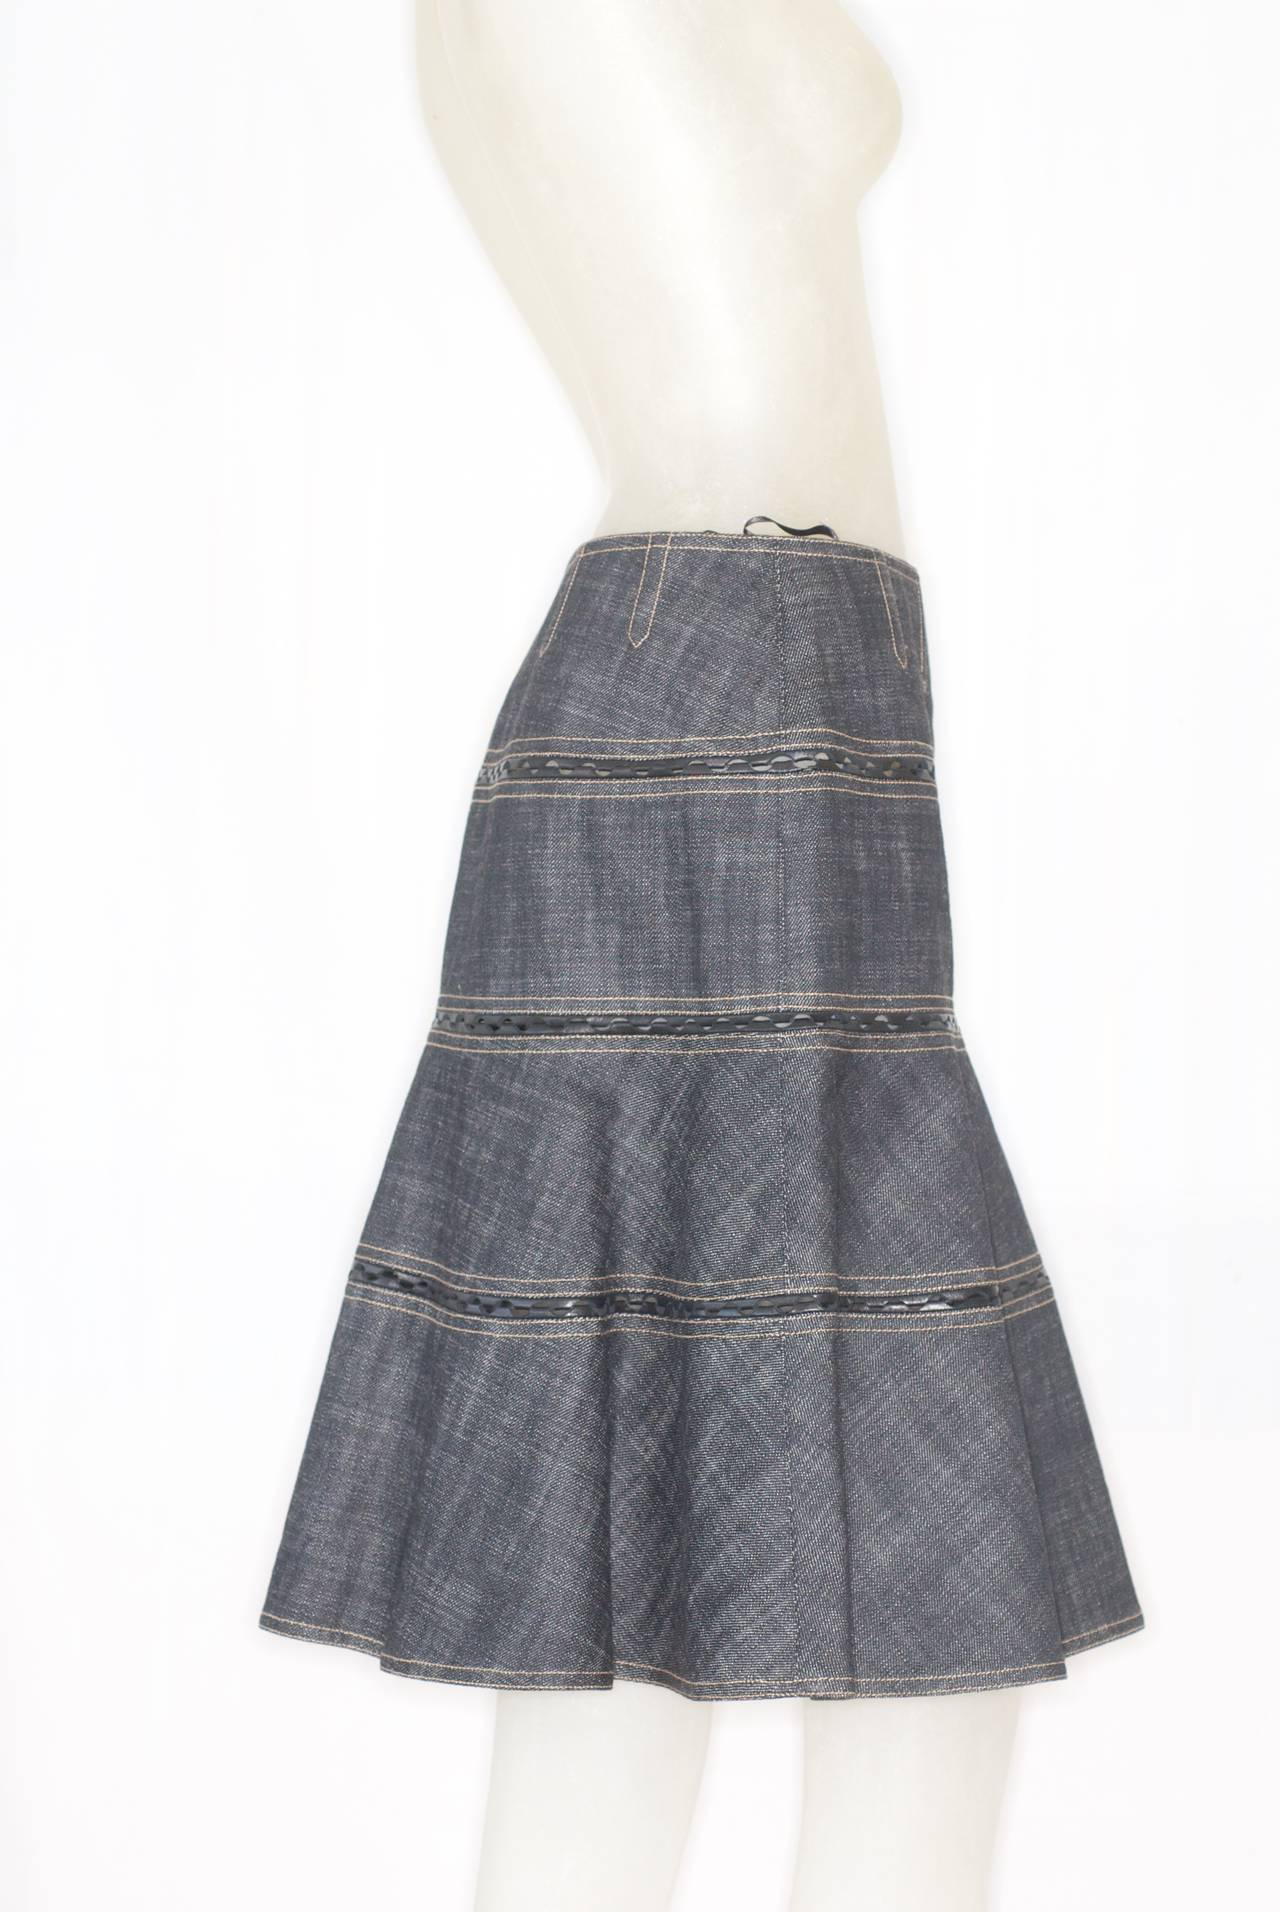 Azzedine Alaia denim skirt with leather inserts. Boning at waist for a beautiful fit.   Excellent condition.  Size tag medium.  May run small, please see measurements:
waist across front: 13 1/2